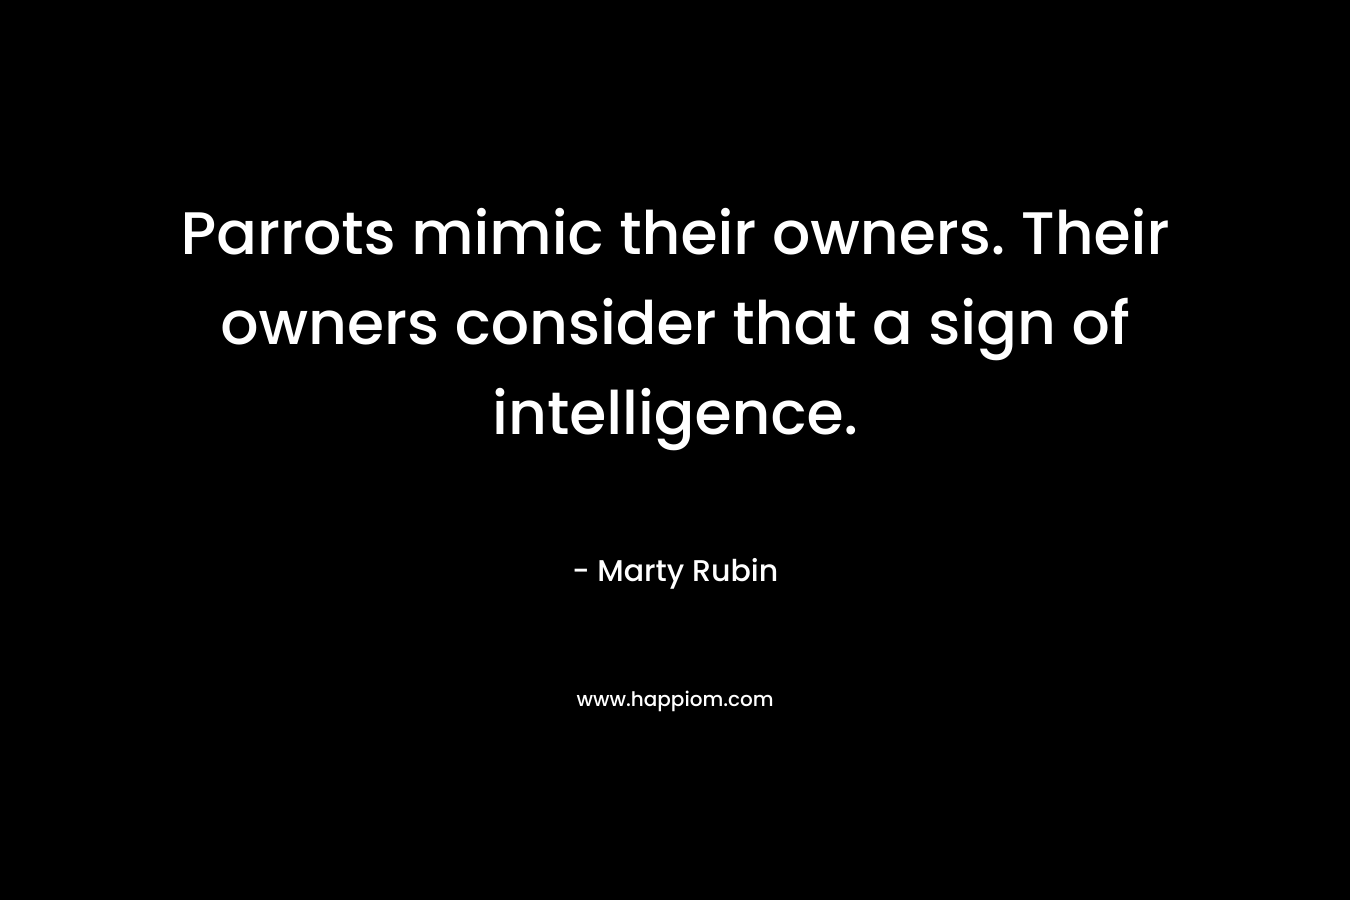 Parrots mimic their owners. Their owners consider that a sign of intelligence. – Marty Rubin